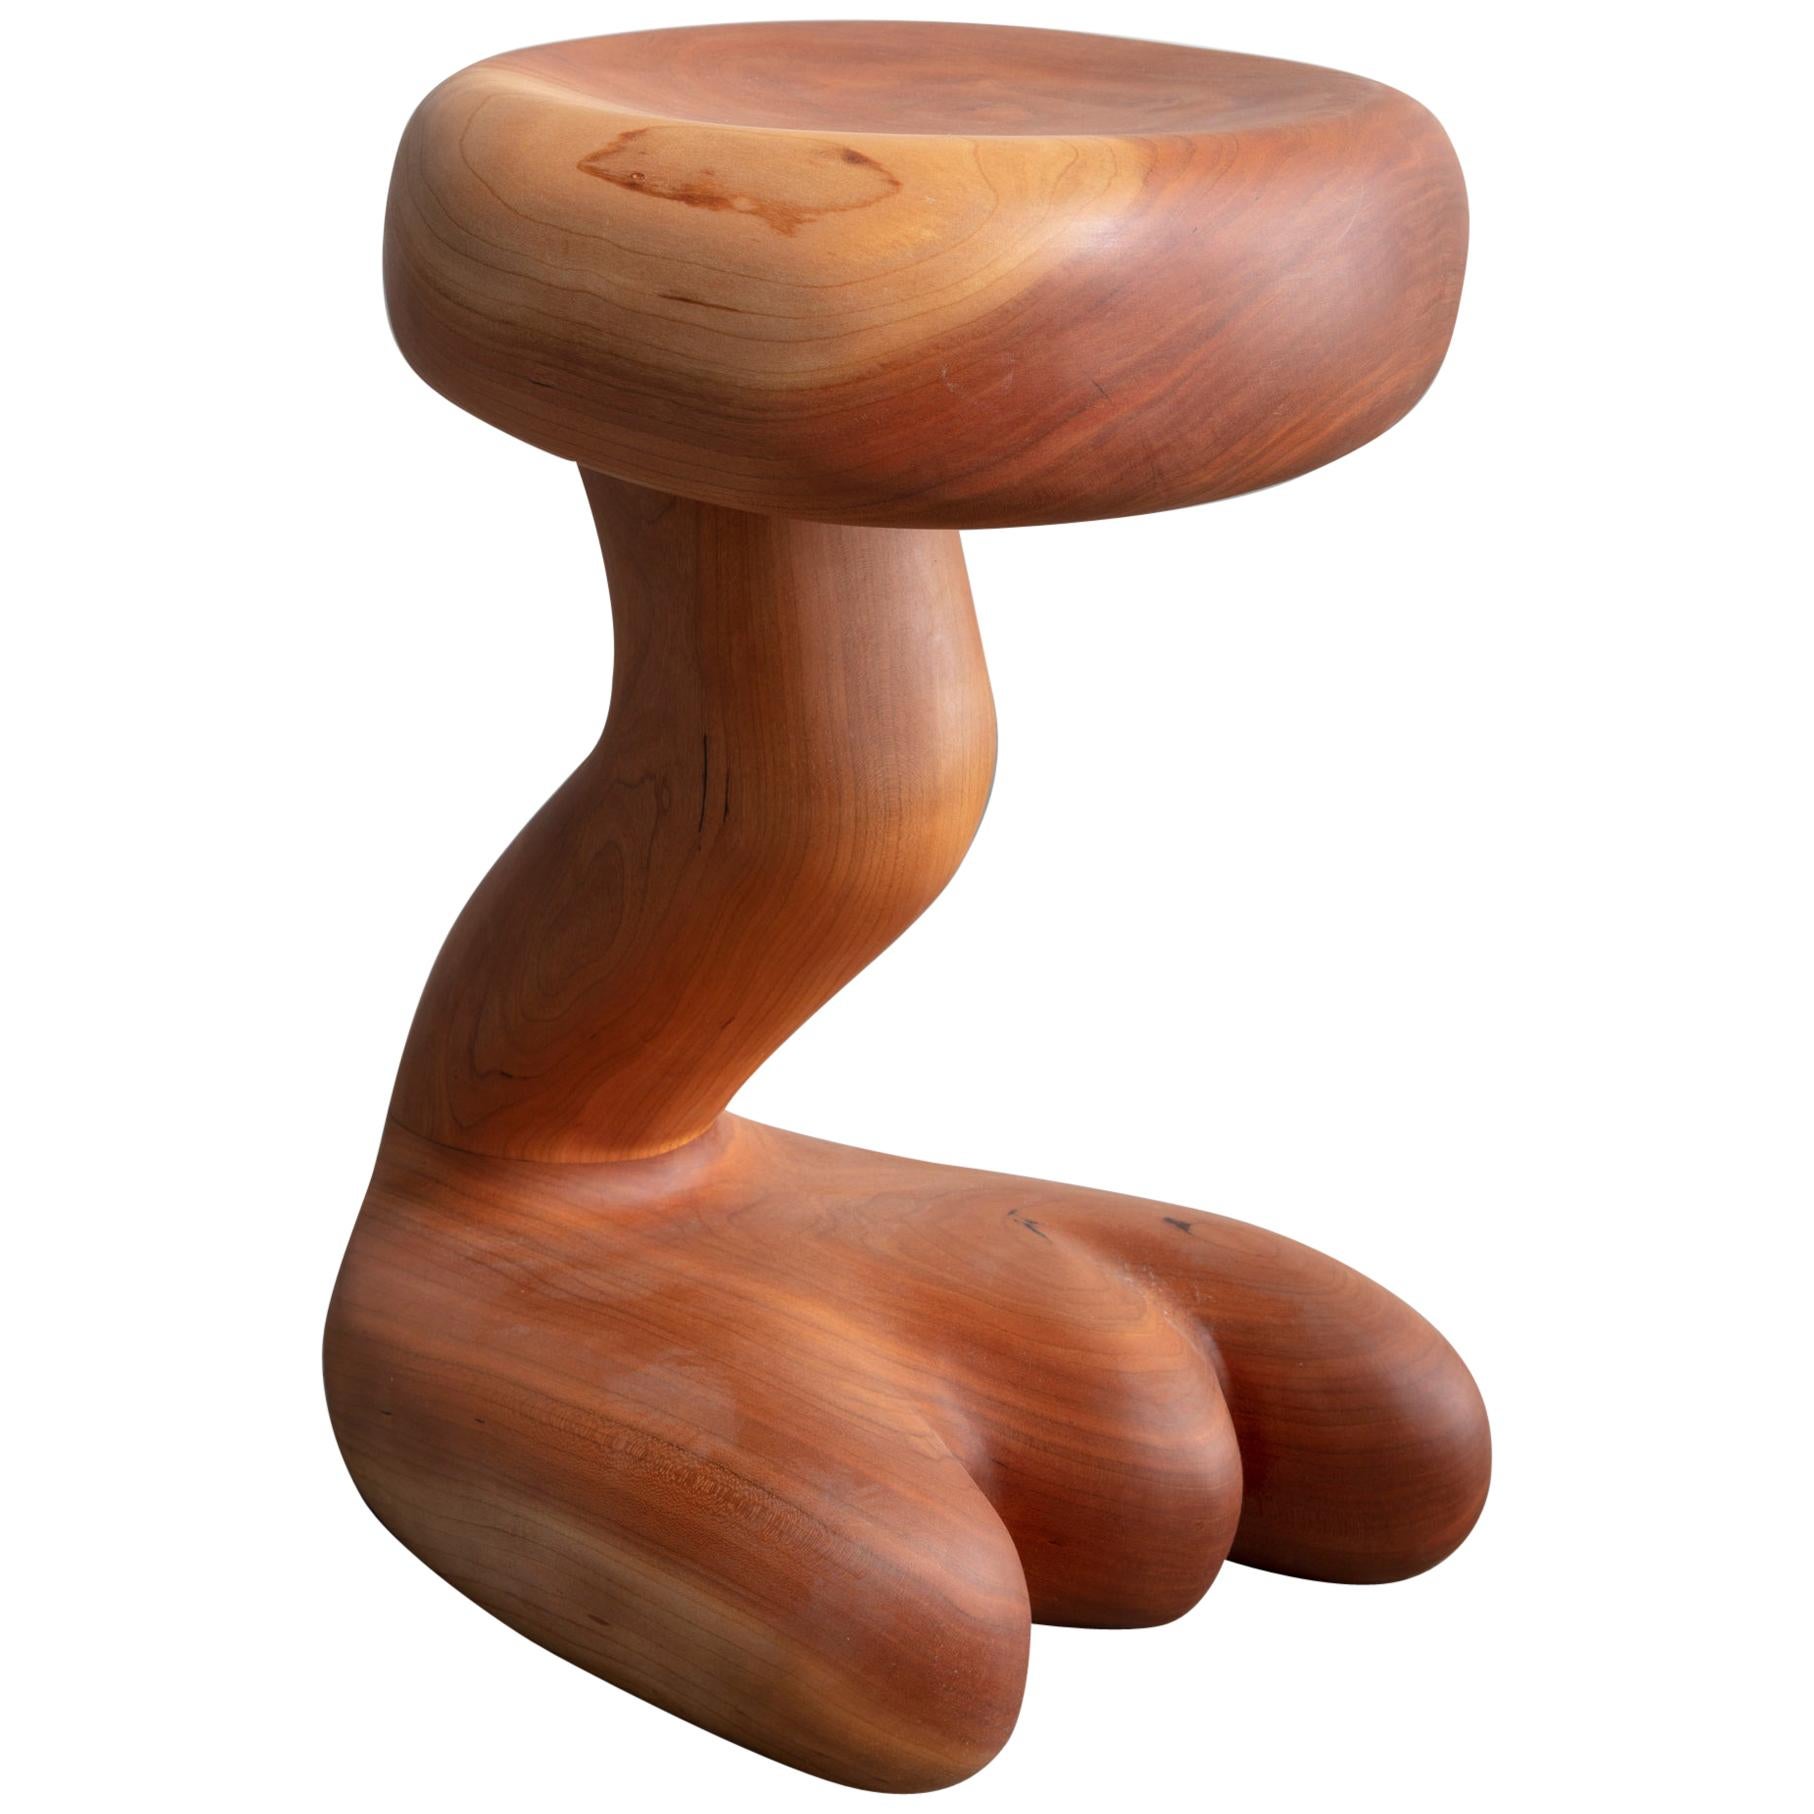 "Long John Silver" Stool in Mahogany by The Haas Brothers, 2016